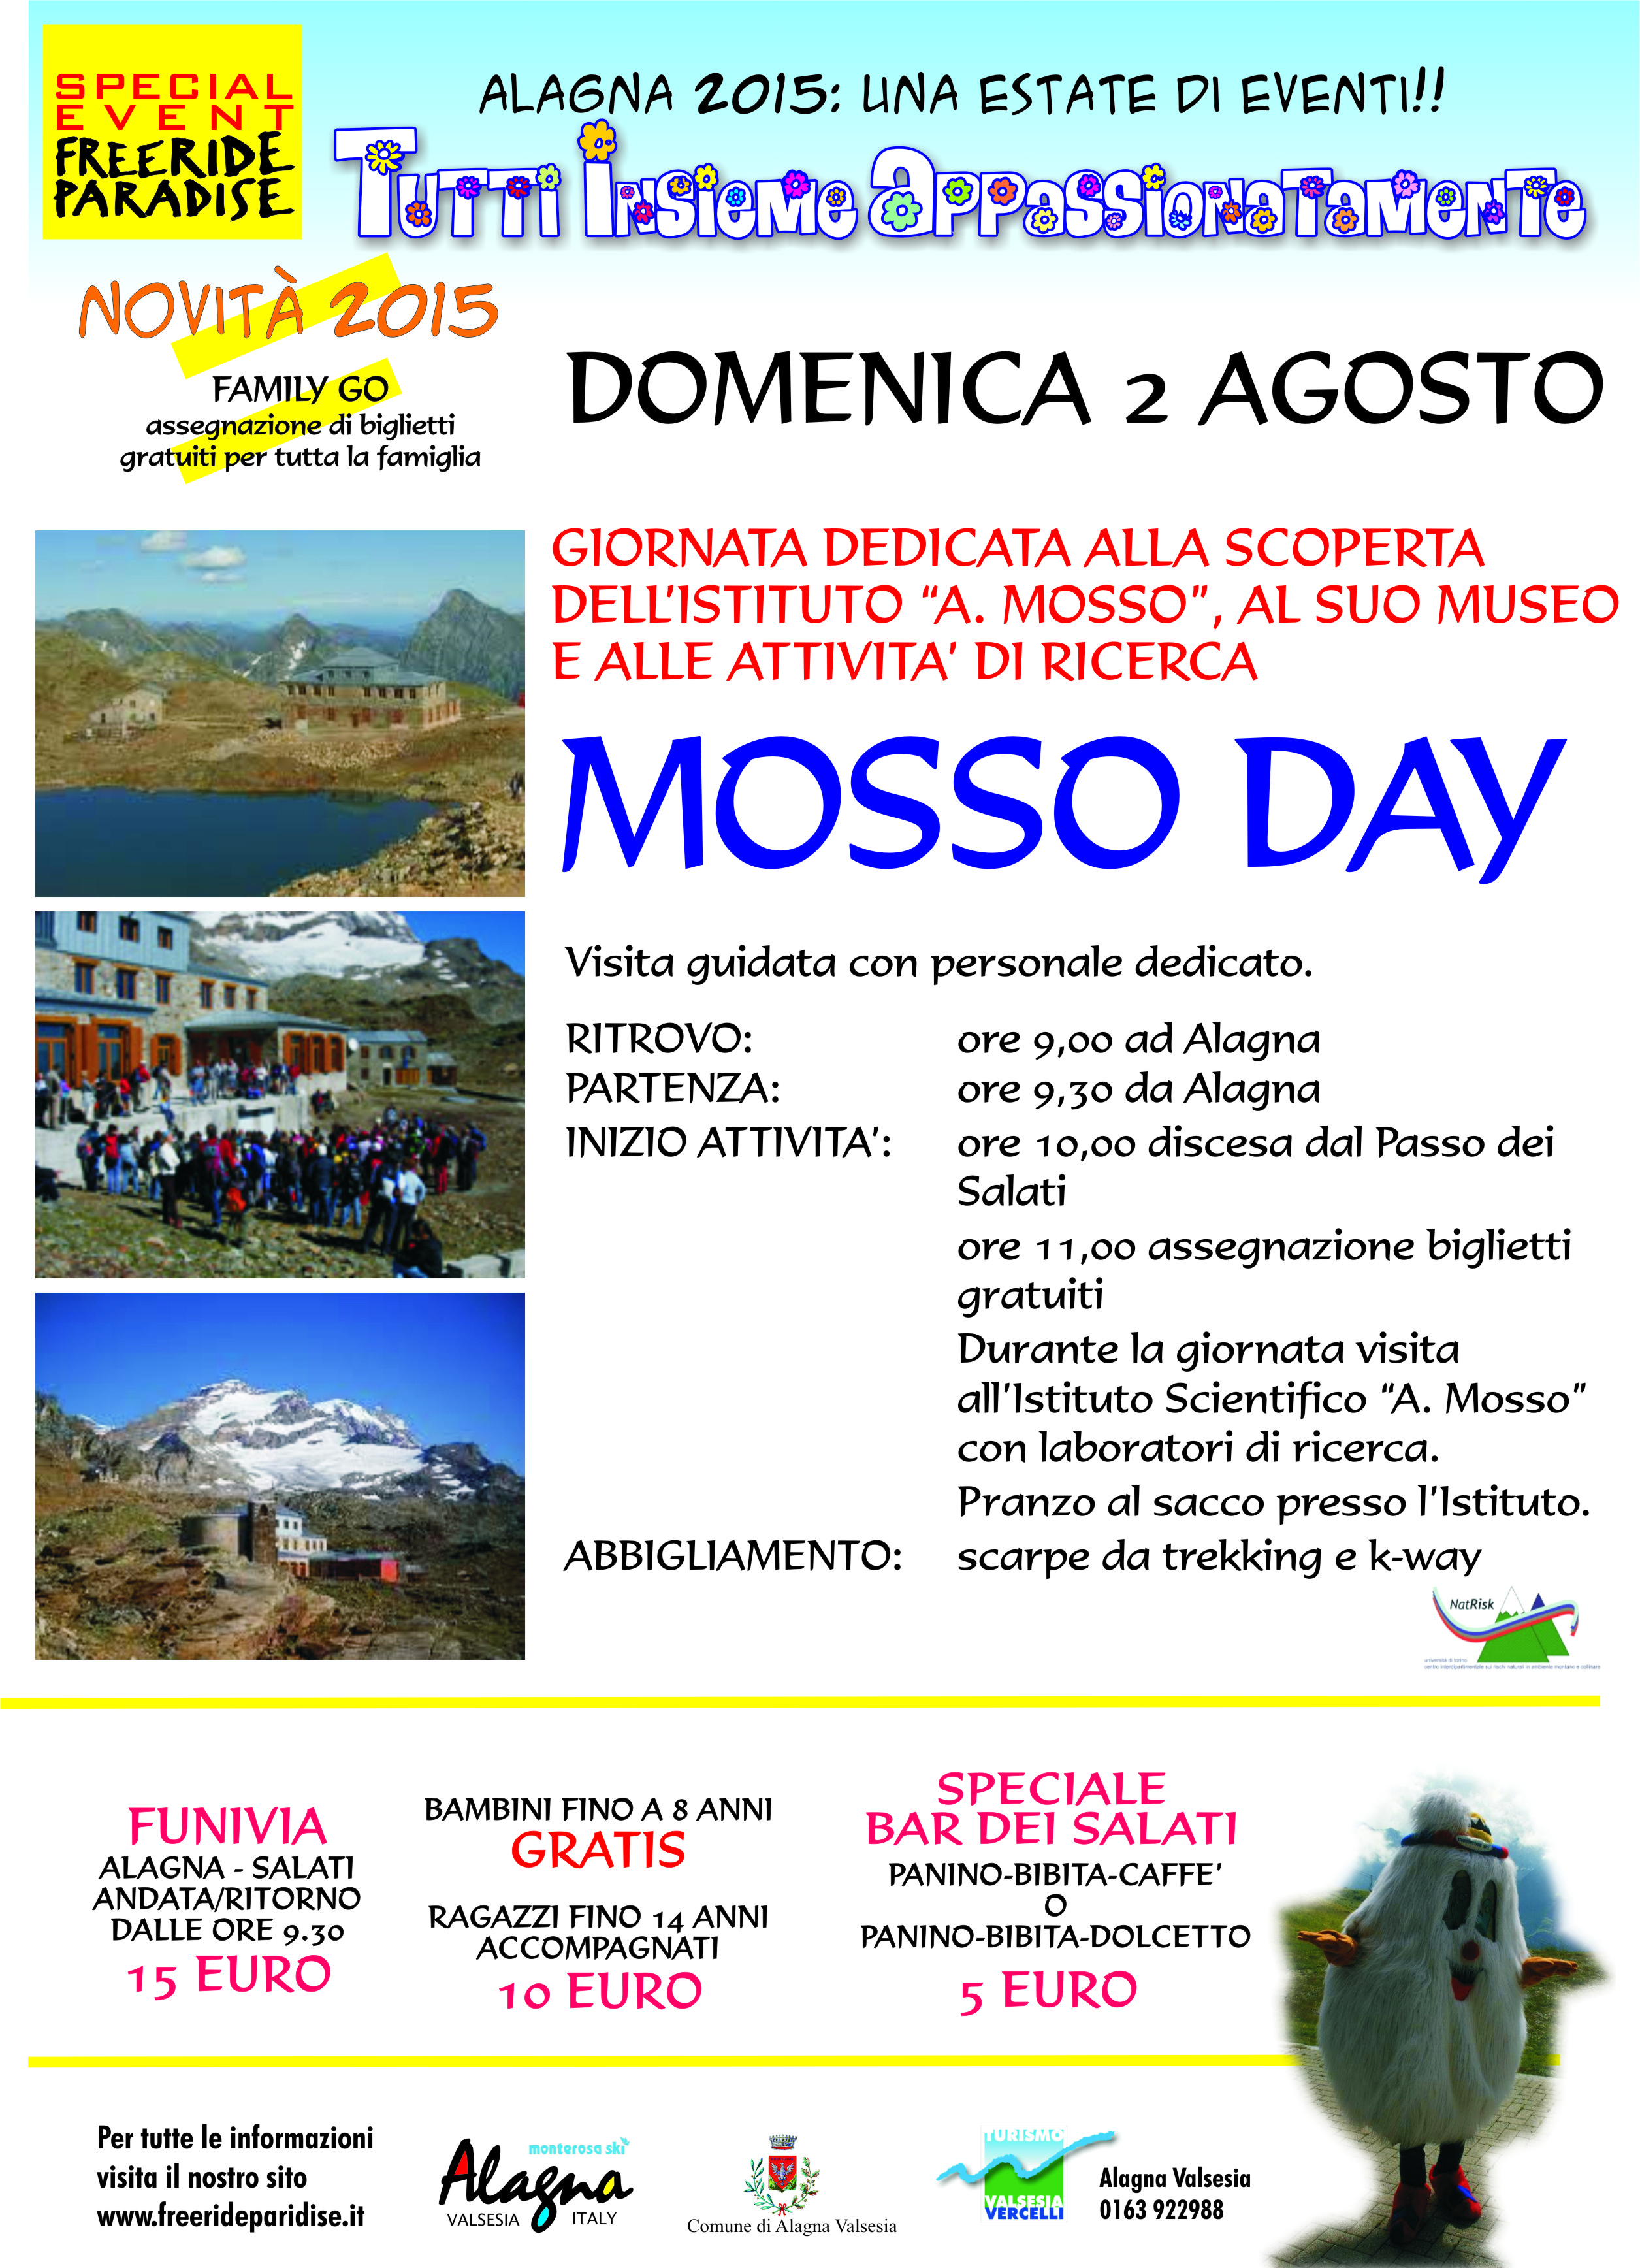 Mosso day